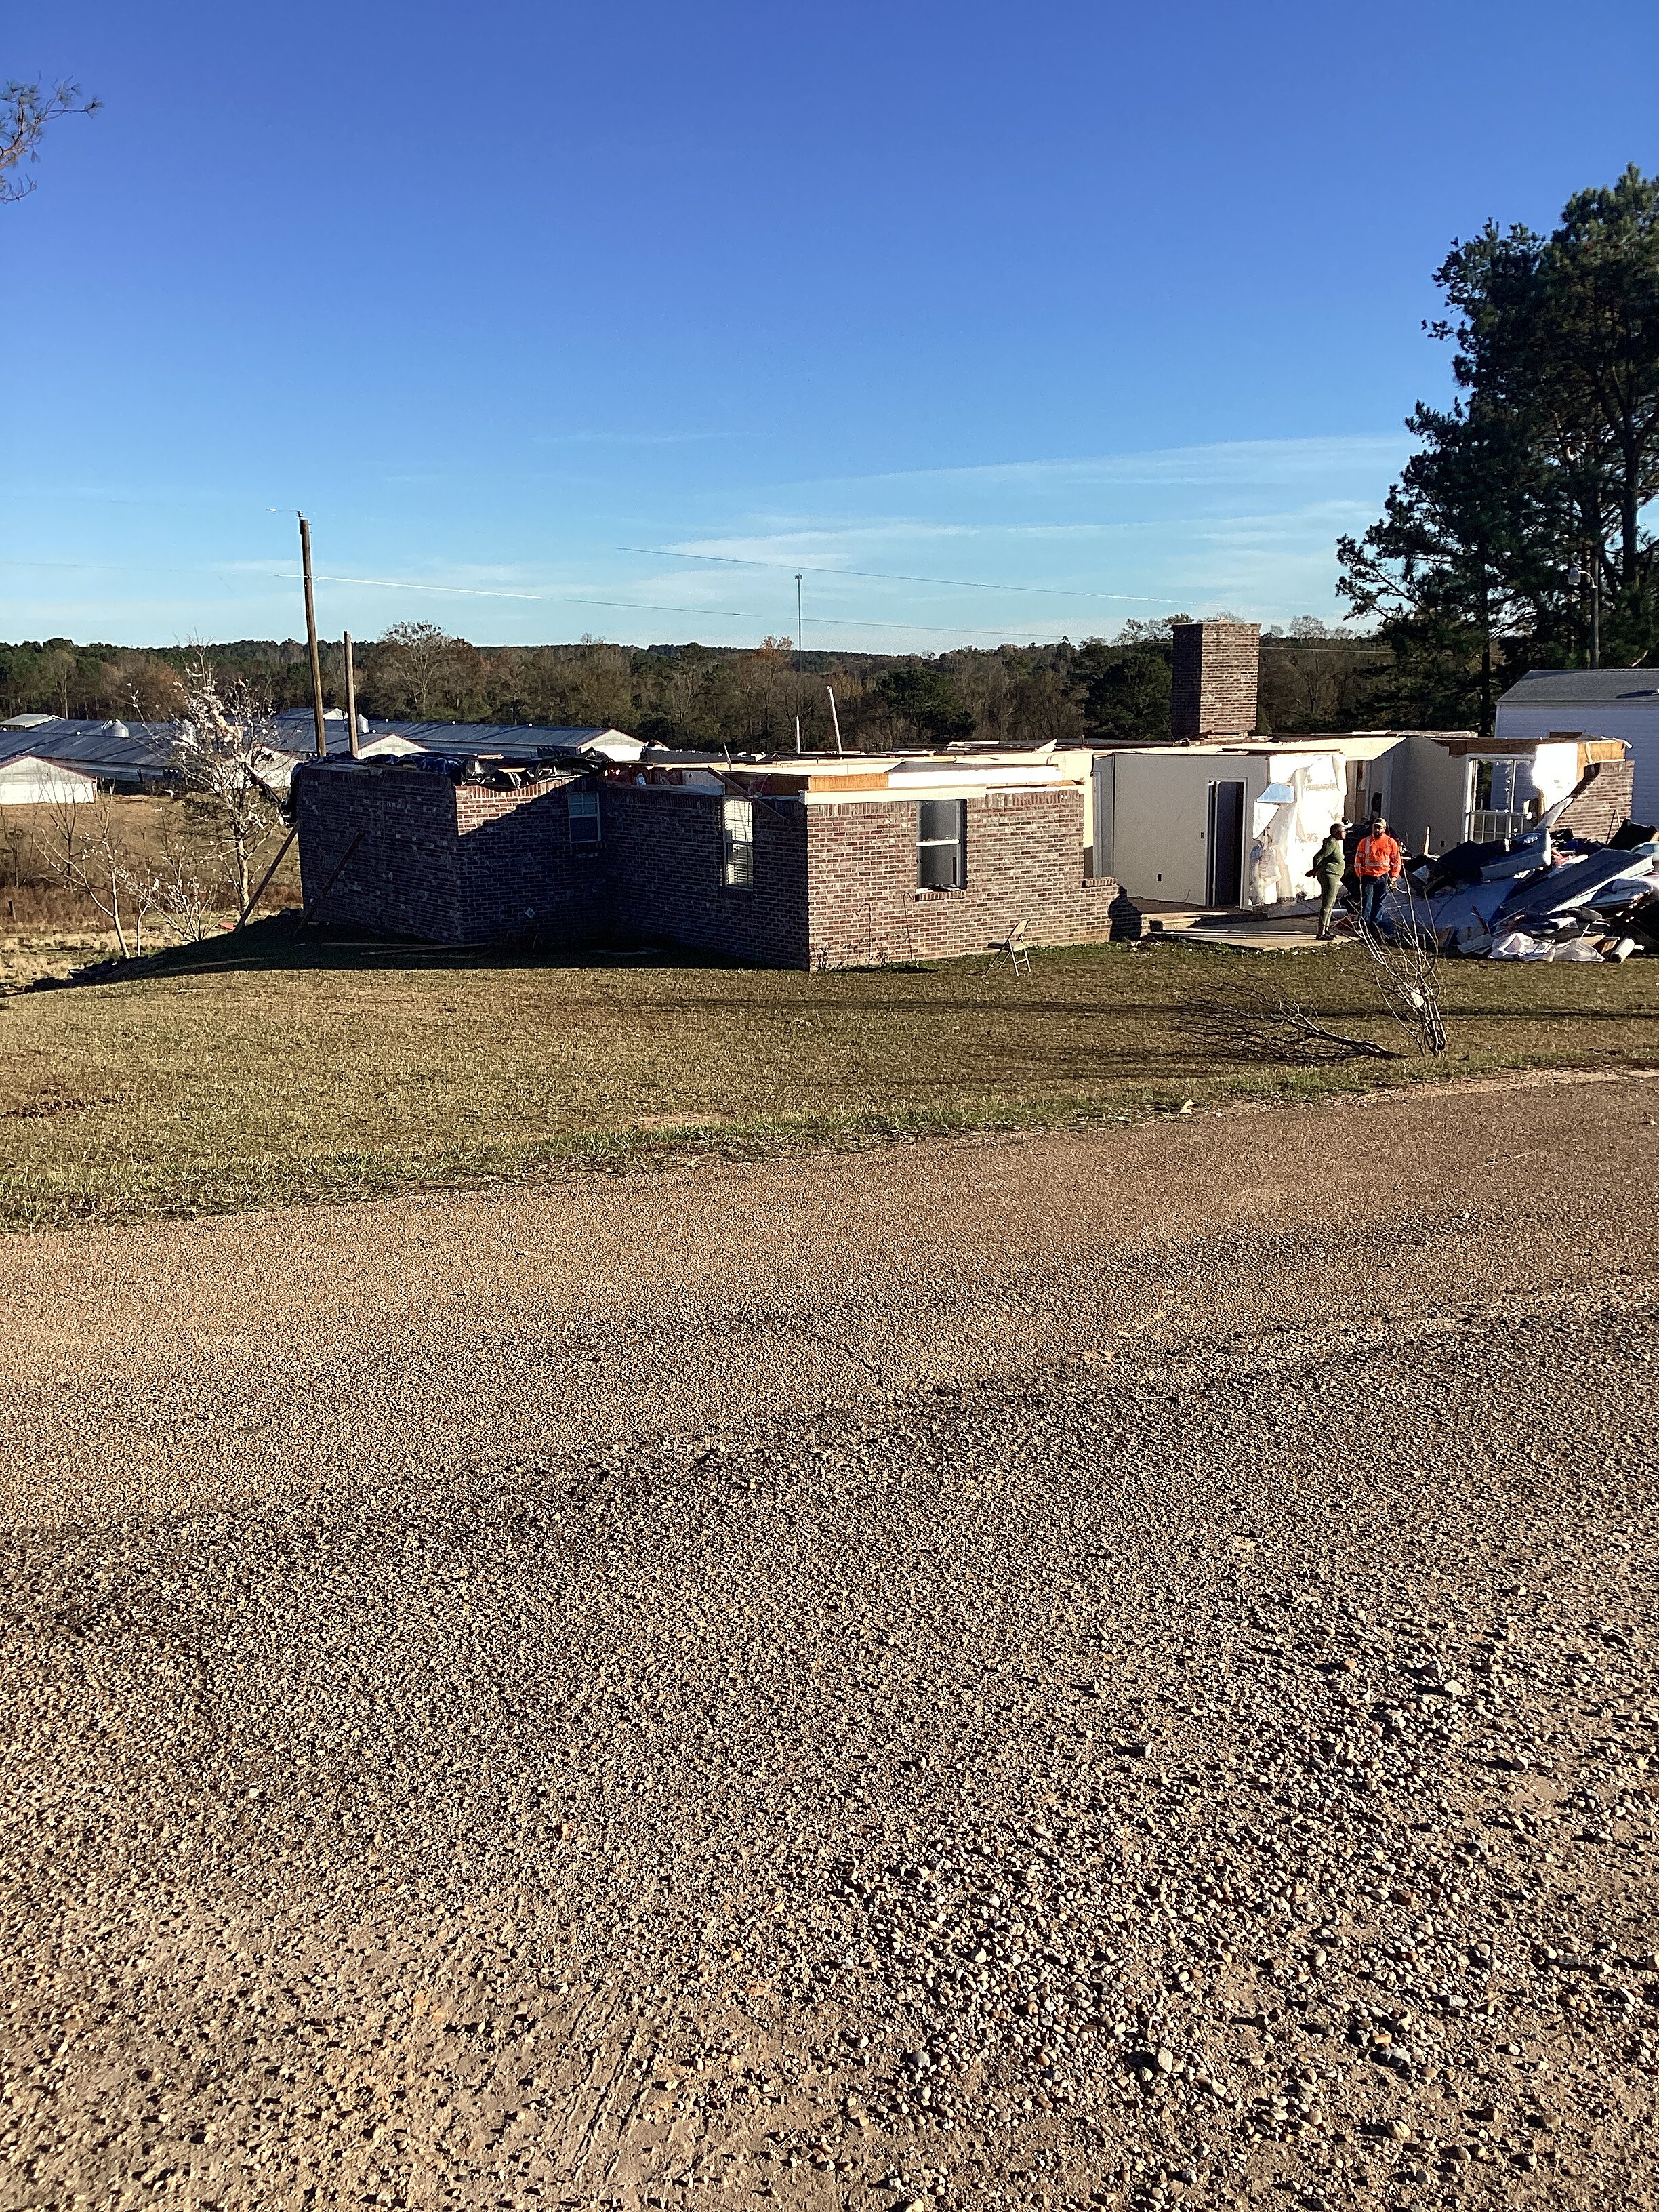 A home that was unroofed by an EF2 tornado in Jasper County, Mississippi.